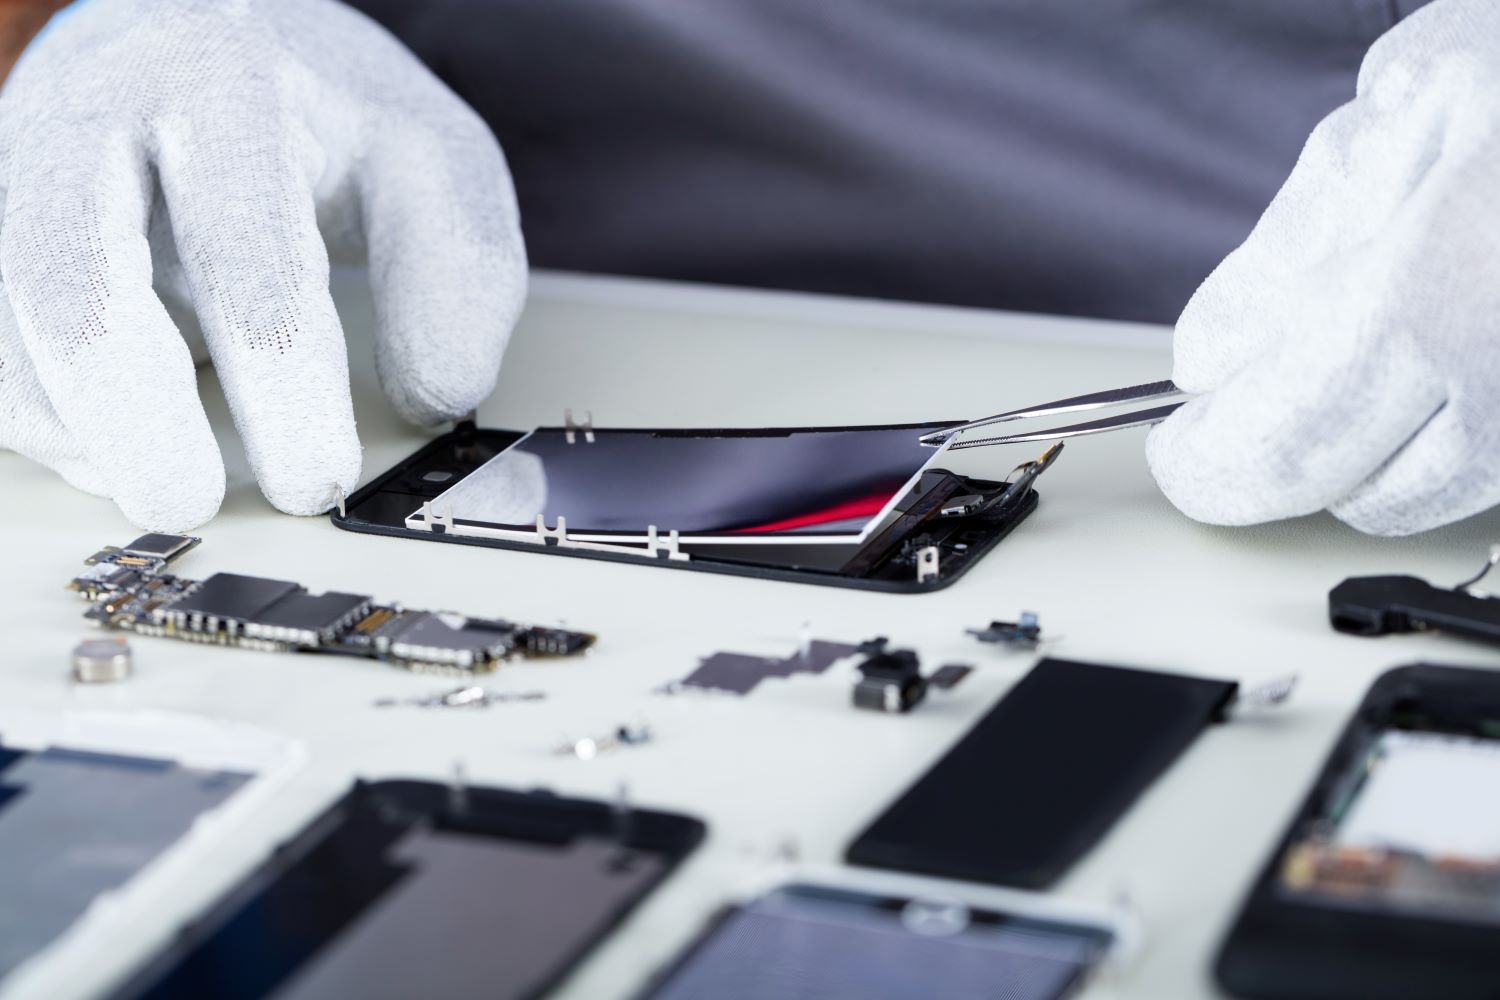 Disassembling a smartphone with tweezers